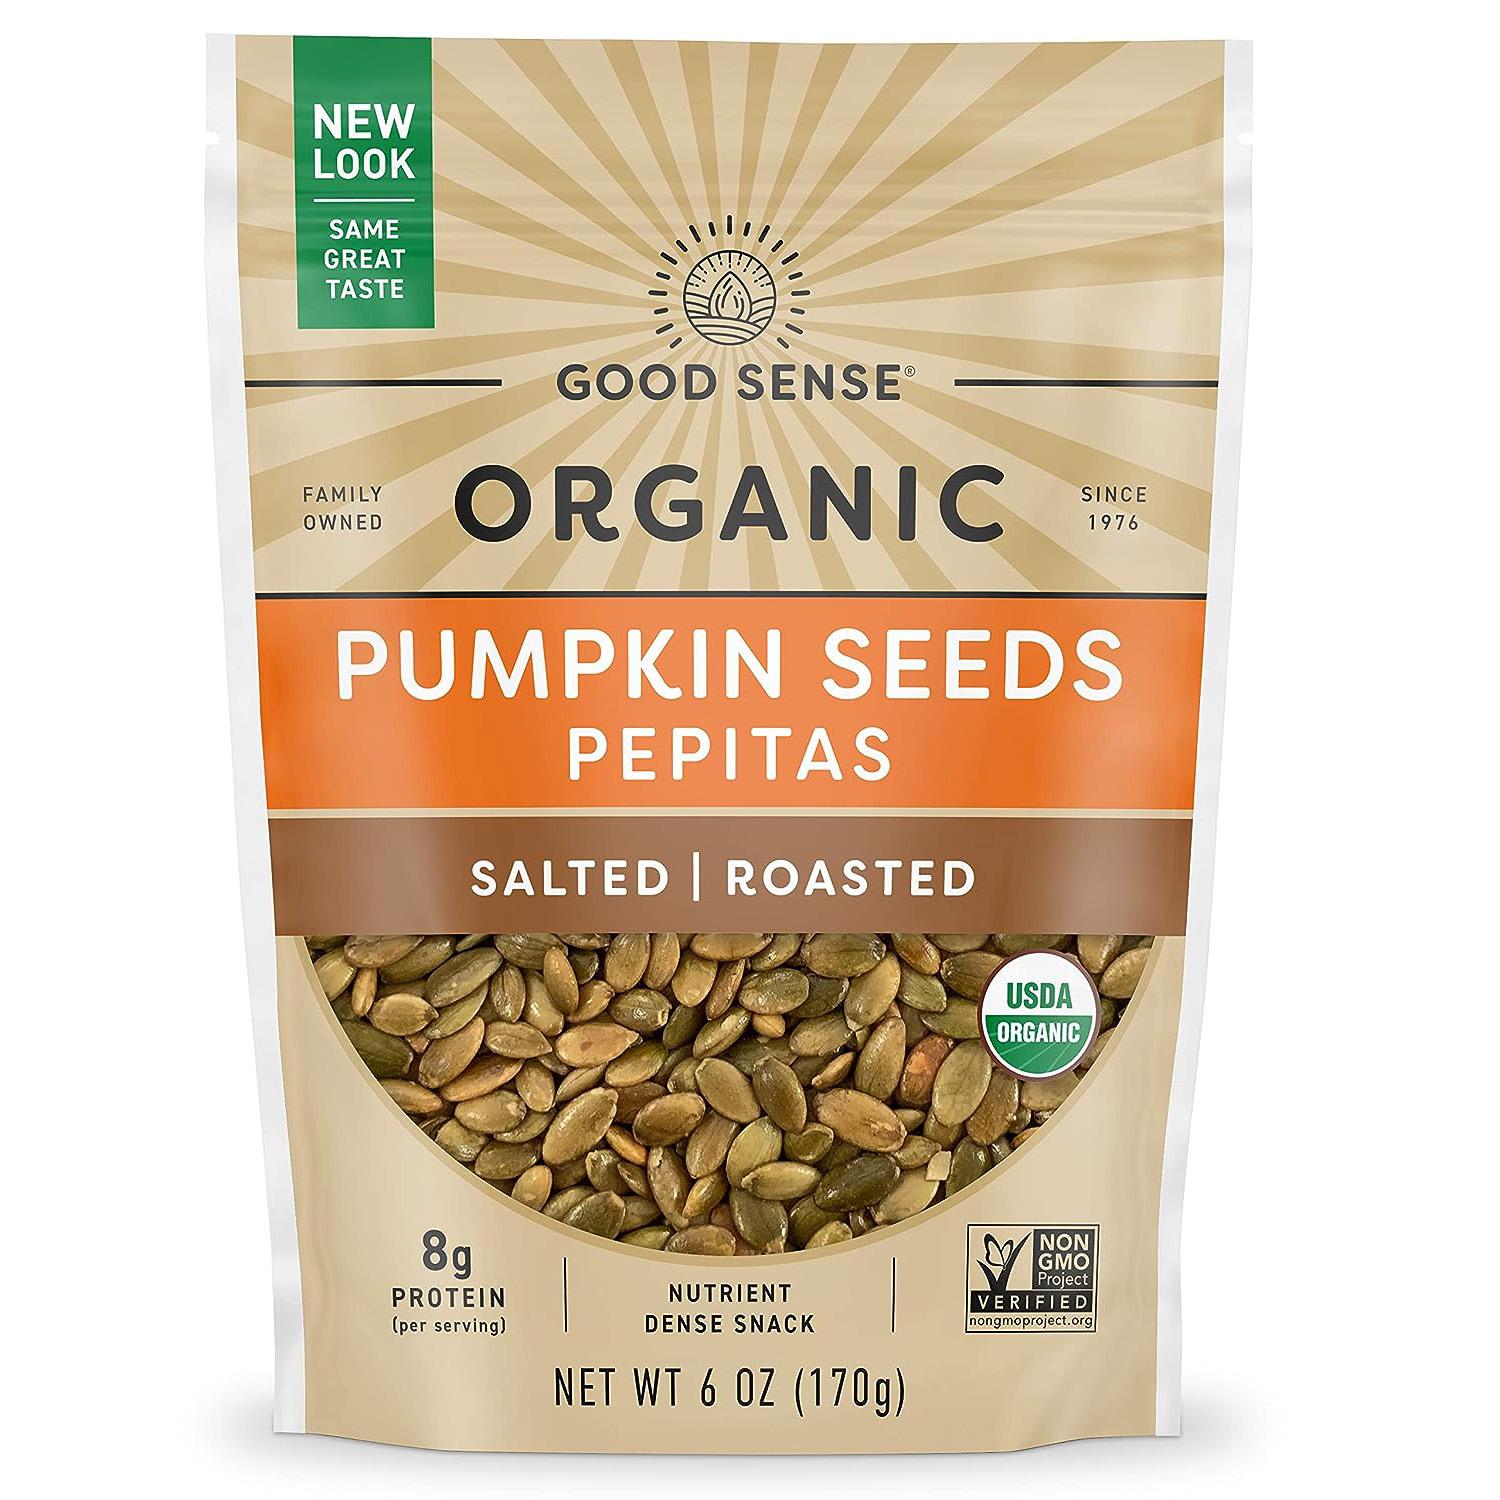 Good Sense Roasted and Salted Organic Pumpkin Seeds for $3.09 Shipped